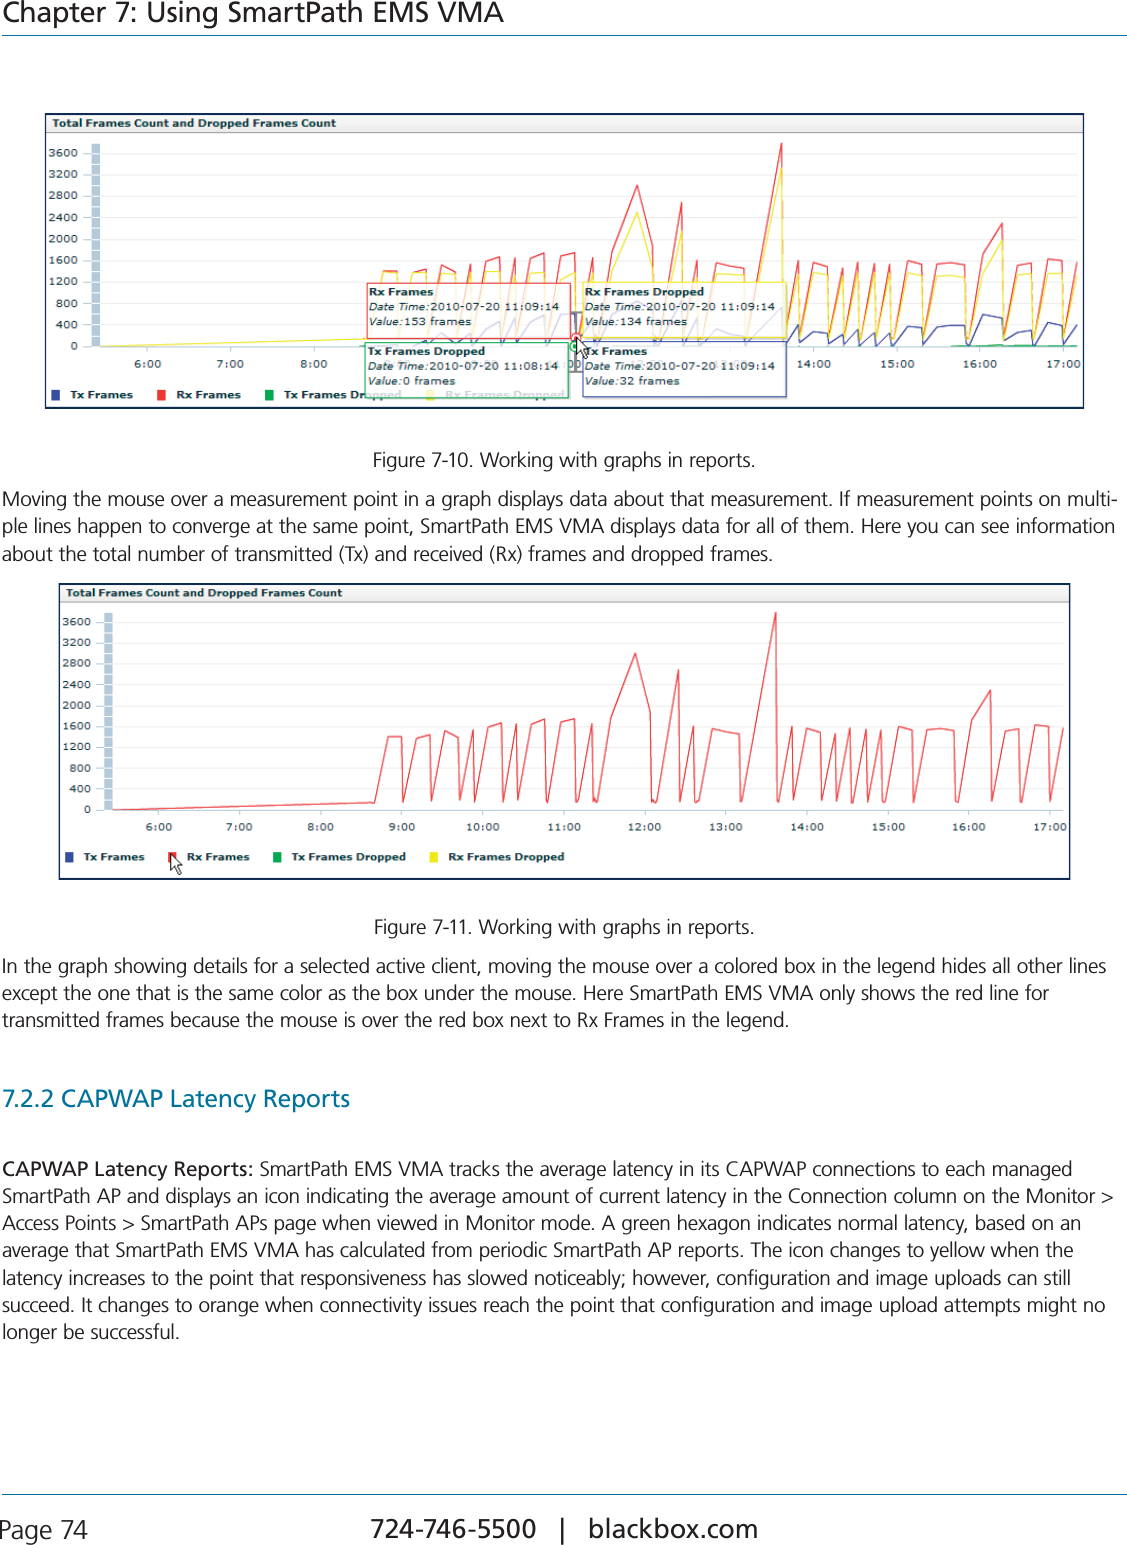 724-746-5500   |   blackbox.com Page 74Chapter 7: Using SmartPath EMS VMAFigure 7-10. Working with graphs in reports.Moving the mouse over a measurement point in a graph displays data about that measurement. If measurement points on multi-PLELINESHAPPENTOCONVERGEATTHESAMEPOINT3MART0ATH%-36-!DISPLAYSDATAFORALLOFTHEM(EREYOUCANSEEINFORMATIONabout the total number of transmitted (Tx) and received (Rx) frames and dropped frames.Figure 7-11. Working with graphs in reports.In the graph showing details for a selected active client, moving the mouse over a colored box in the legend hides all other lines EXCEPTTHEONETHATISTHESAMECOLORASTHEBOXUNDERTHEMOUSE(ERE3MART0ATH%-36-!ONLYSHOWSTHEREDLINEFOR transmitted frames because the mouse is over the red box next to Rx Frames in the legend.7.2.2 CAPWAP Latency ReportsCAPWAP Latency Reports:3MART0ATH%-36-!TRACKSTHEAVERAGELATENCYINITS#!07!0CONNECTIONSTOEACHMANAGEDSmartPath AP and displays an icon indicating the average amount of current latency in the Connection column on the Monitor &gt; Access Points &gt; SmartPath APs page when viewed in Monitor mode. A green hexagon indicates normal latency, based on an AVERAGETHAT3MART0ATH%-36-!HASCALCULATEDFROMPERIODIC3MART0ATH!0REPORTS4HEICONCHANGESTOYELLOWWHENTHElatency increases to the point that responsiveness has slowed noticeably; however, configuration and image uploads can still  succeed. It changes to orange when connectivity issues reach the point that configuration and image upload attempts might no longer be successful. 